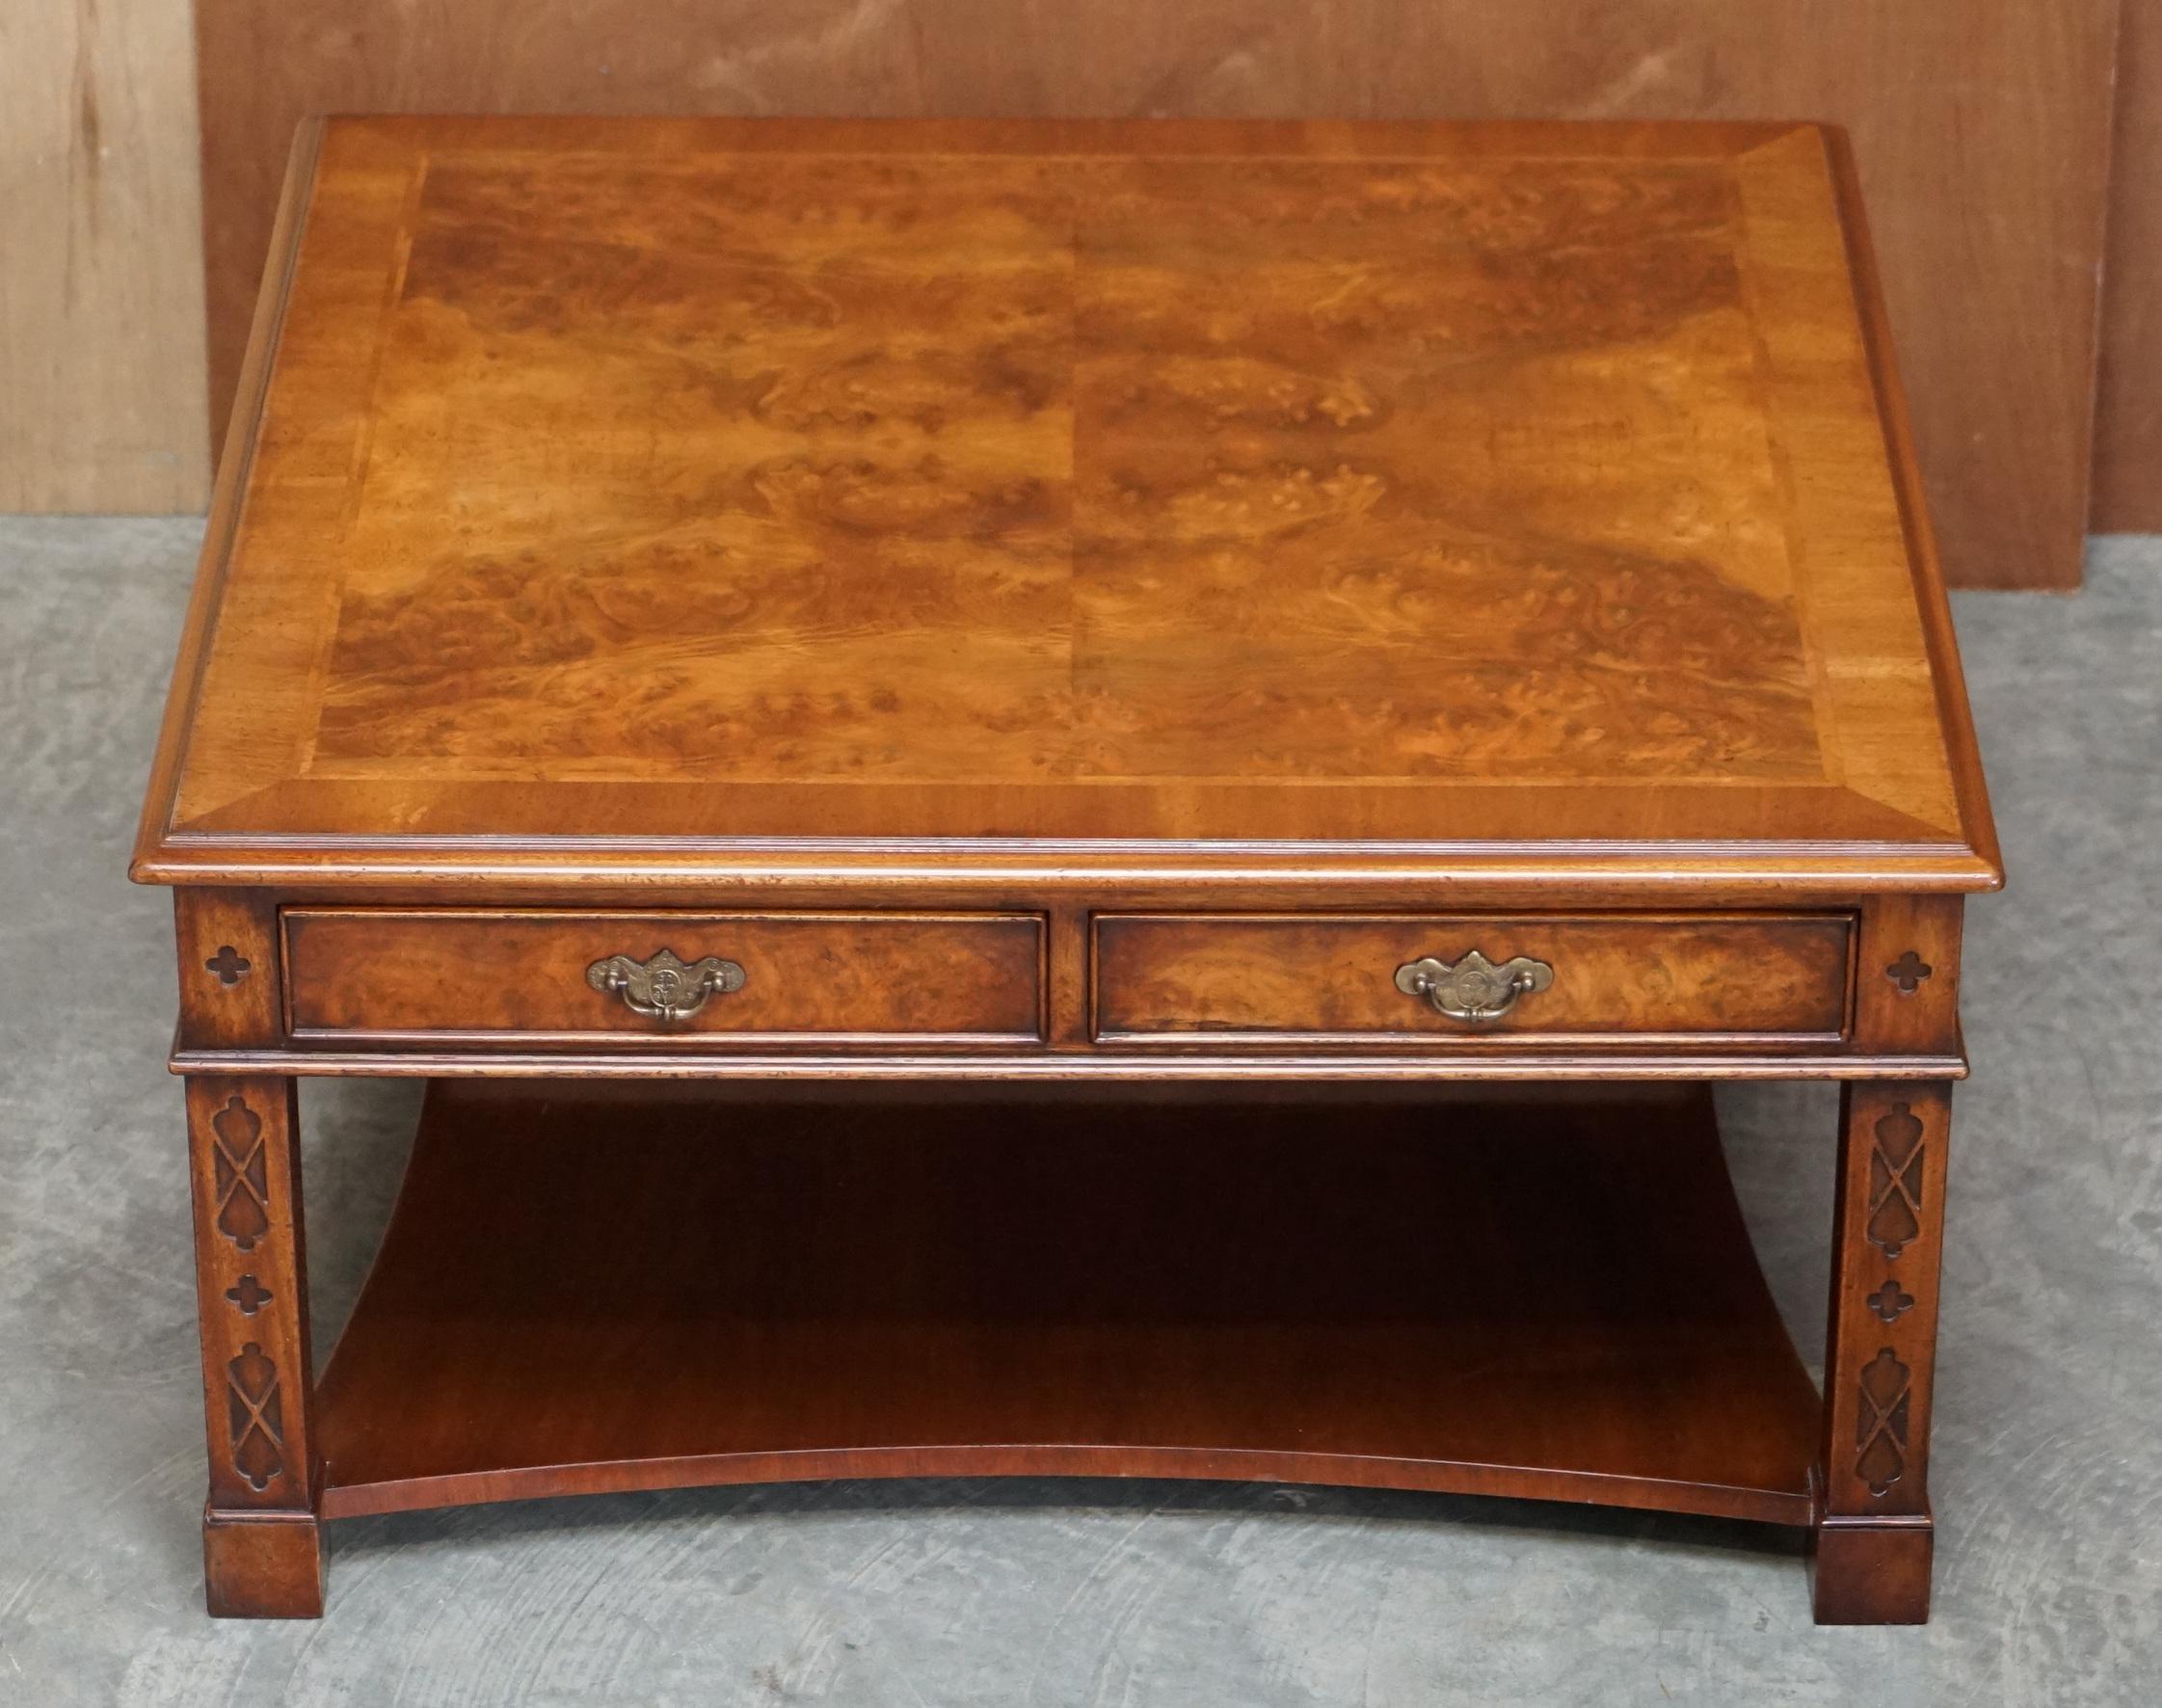 We are delighted to offer for sale this stunning Brights of Nettlebed burr walnut large four drawer coffee or cocktail table

A good looking well made and decorative piece, the timber patina is sublime, the legs are carved in the Thomas